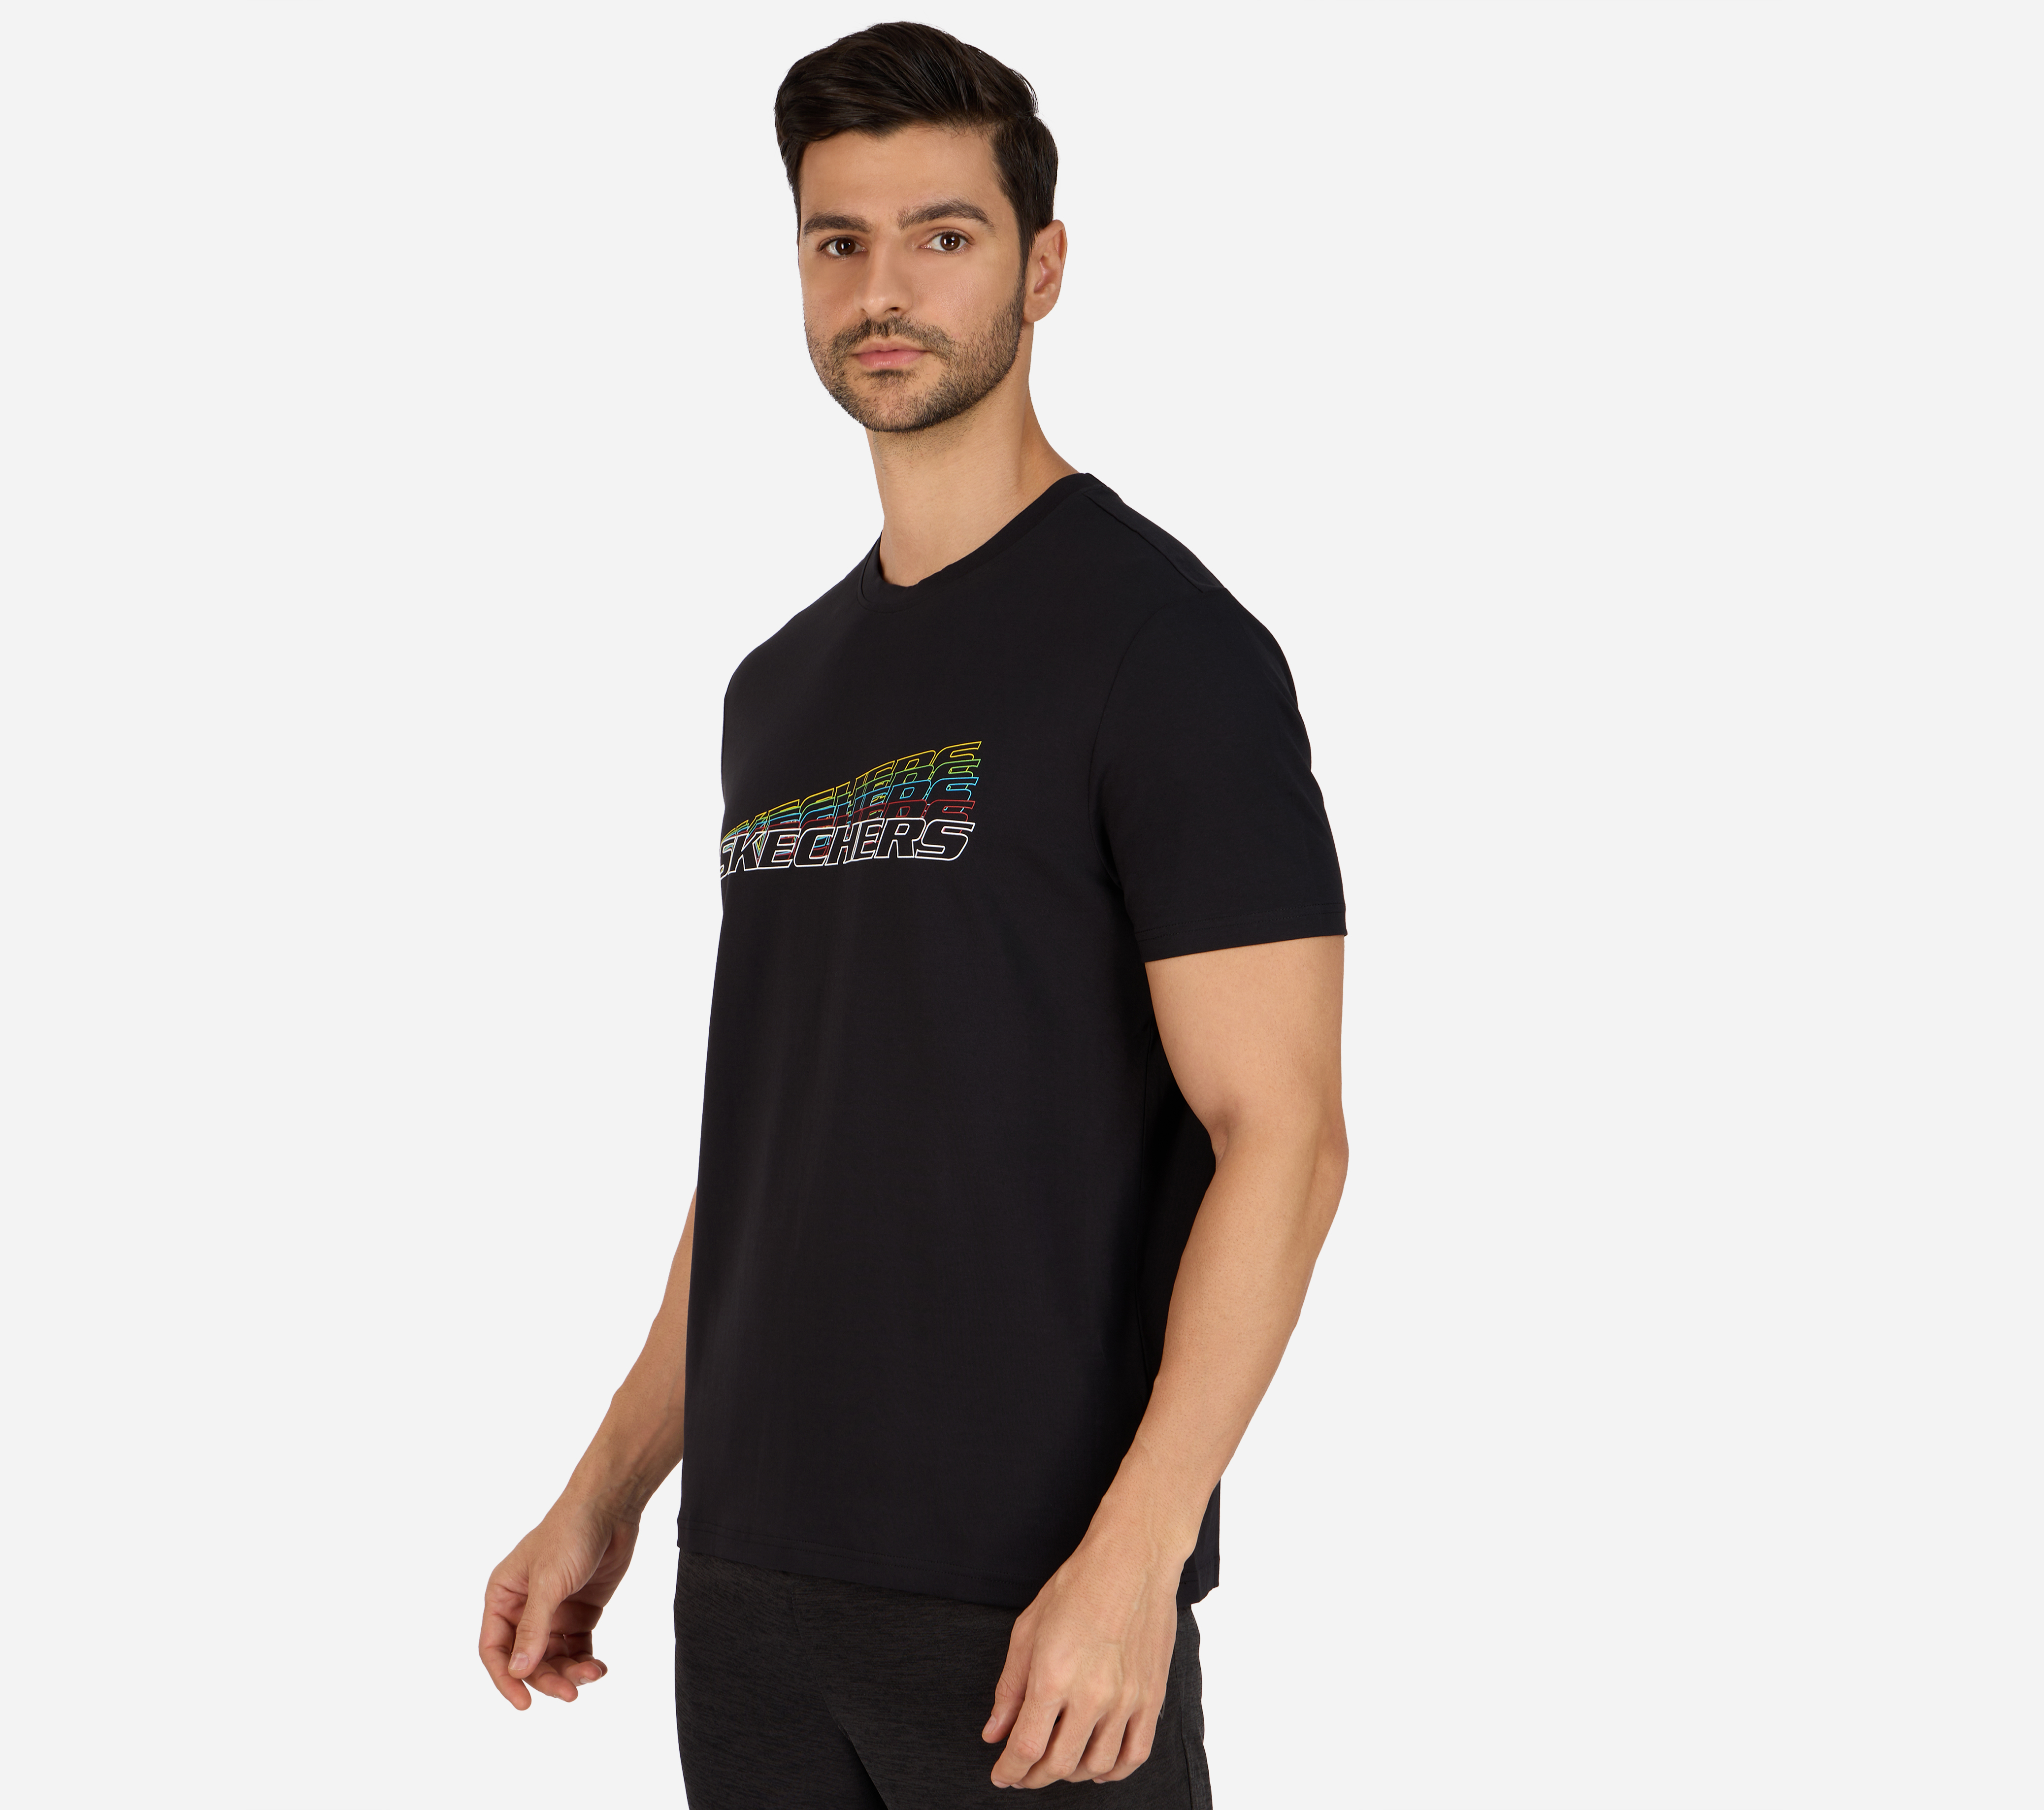 SS SKECHERS GRAPHIC TEE, BBBBLACK Apparels Top View